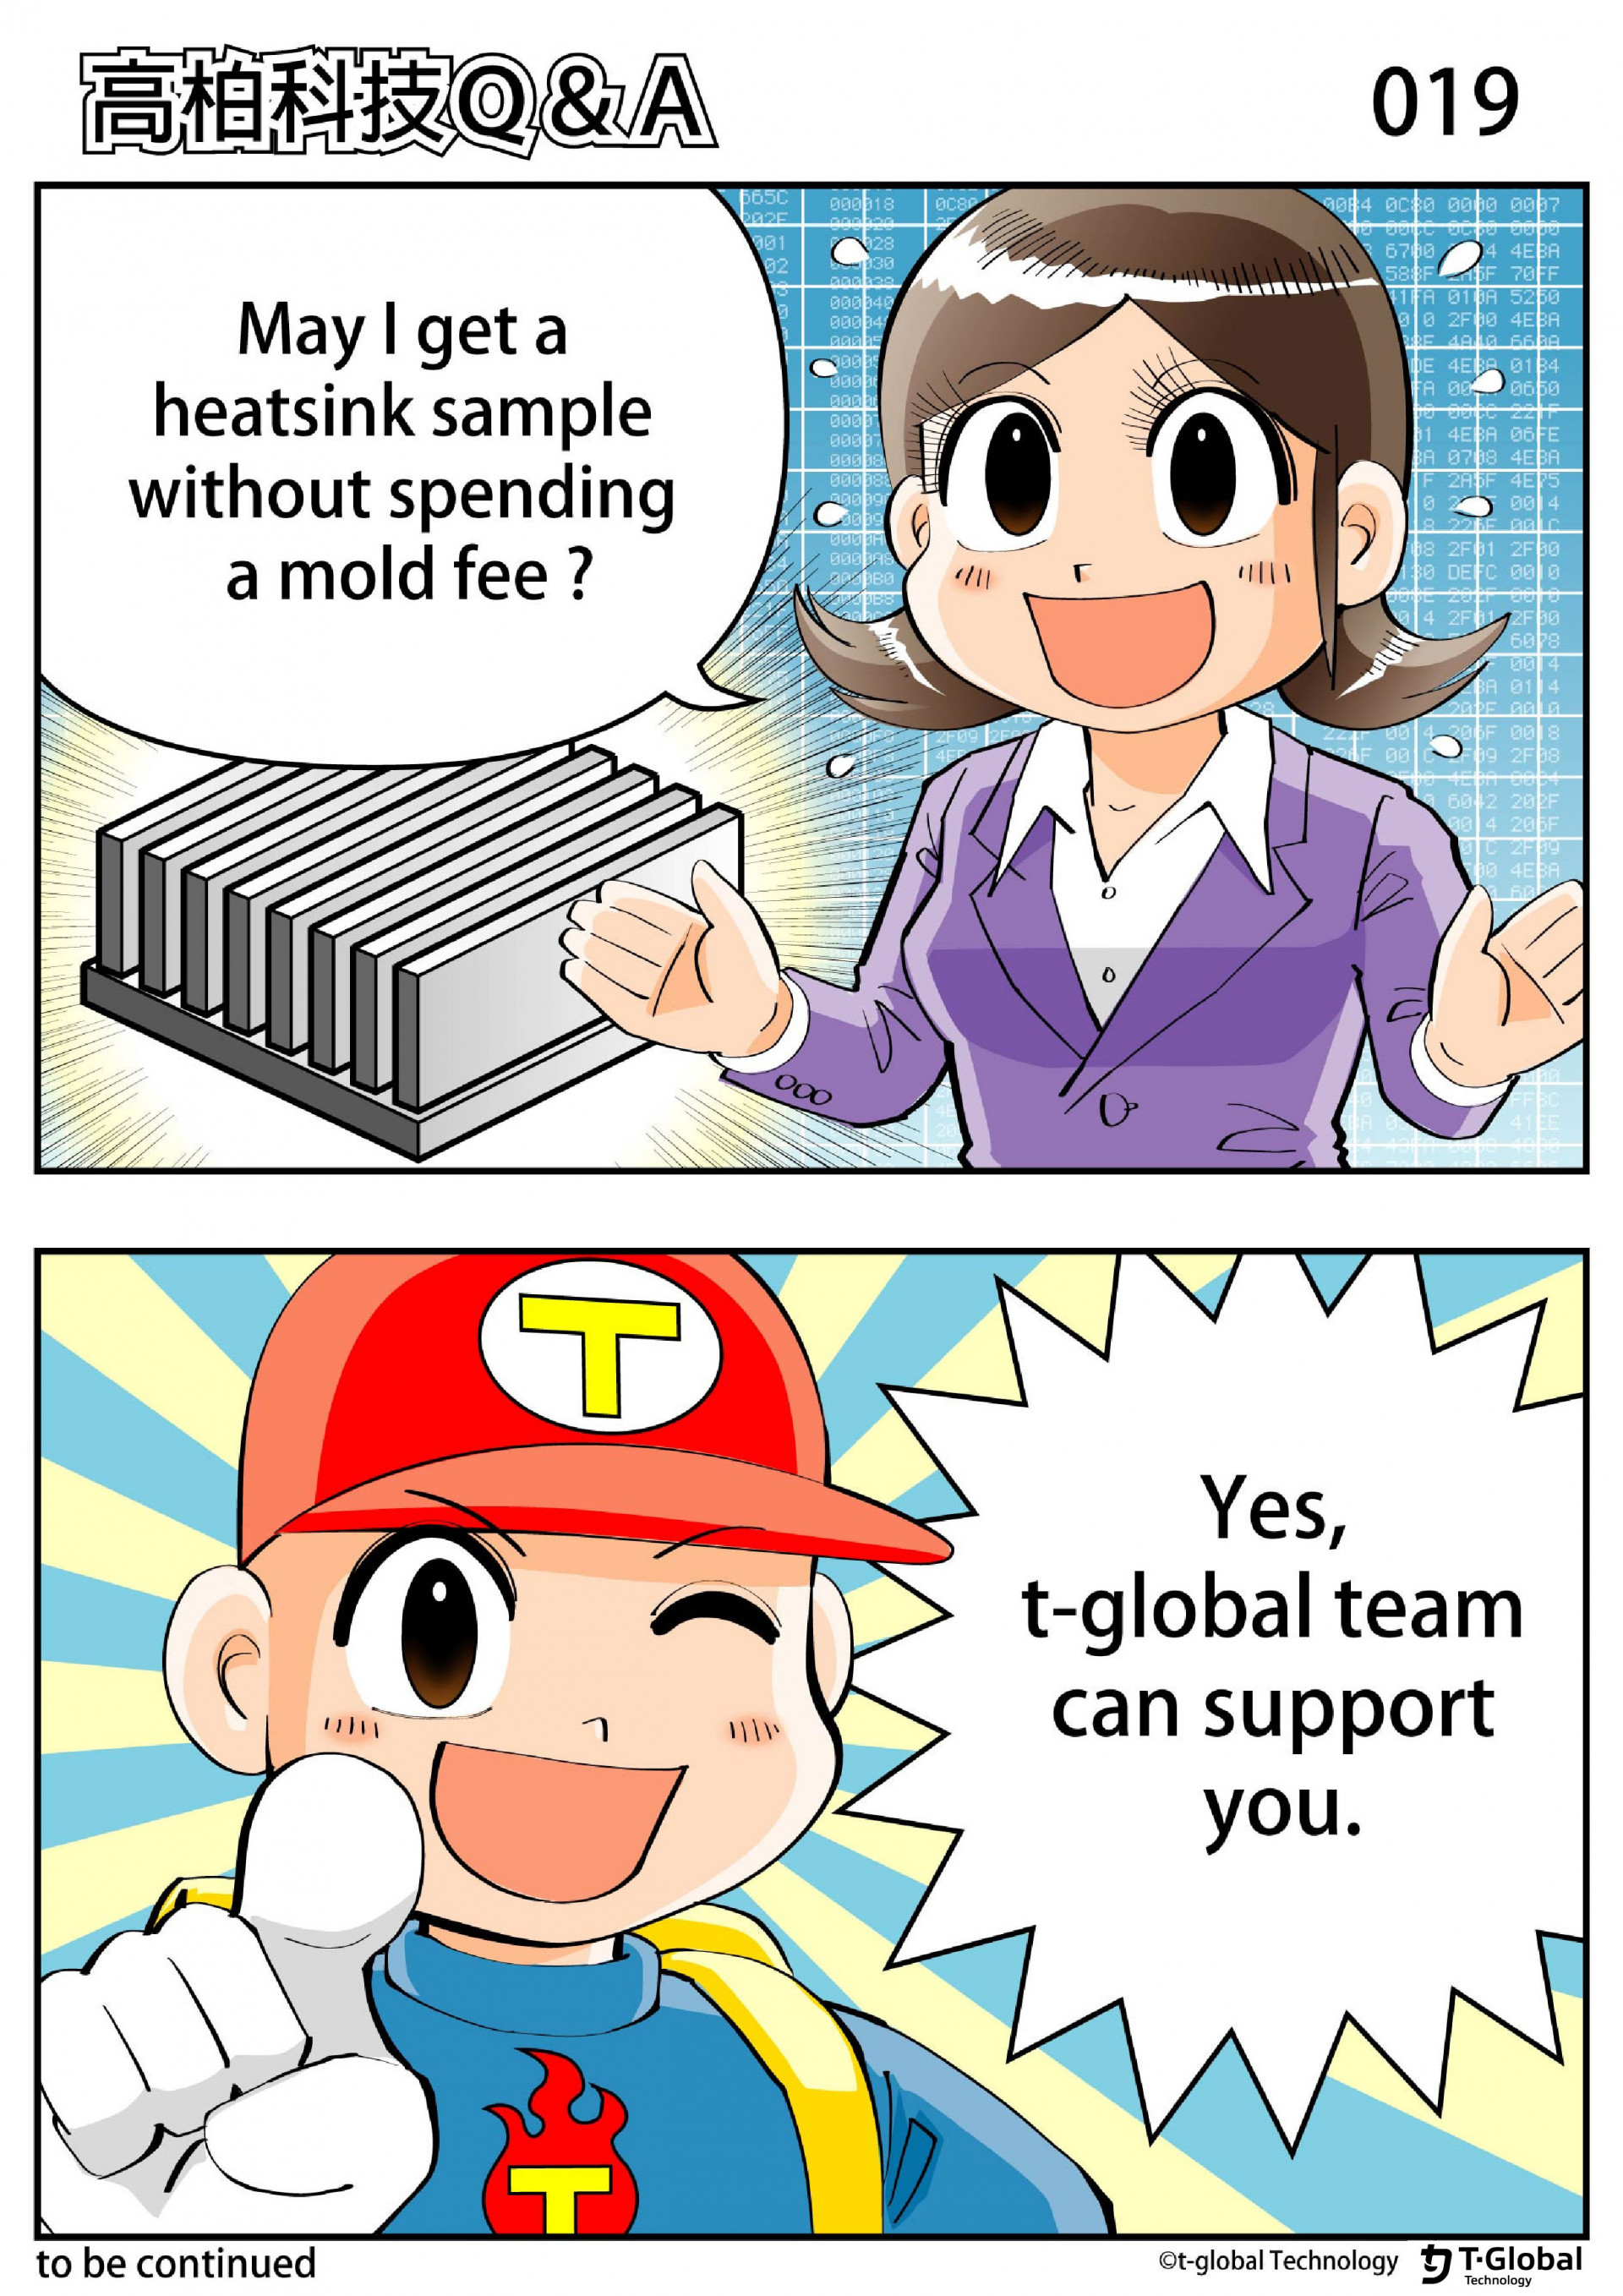 May I get a heatsink sample without spending a mol